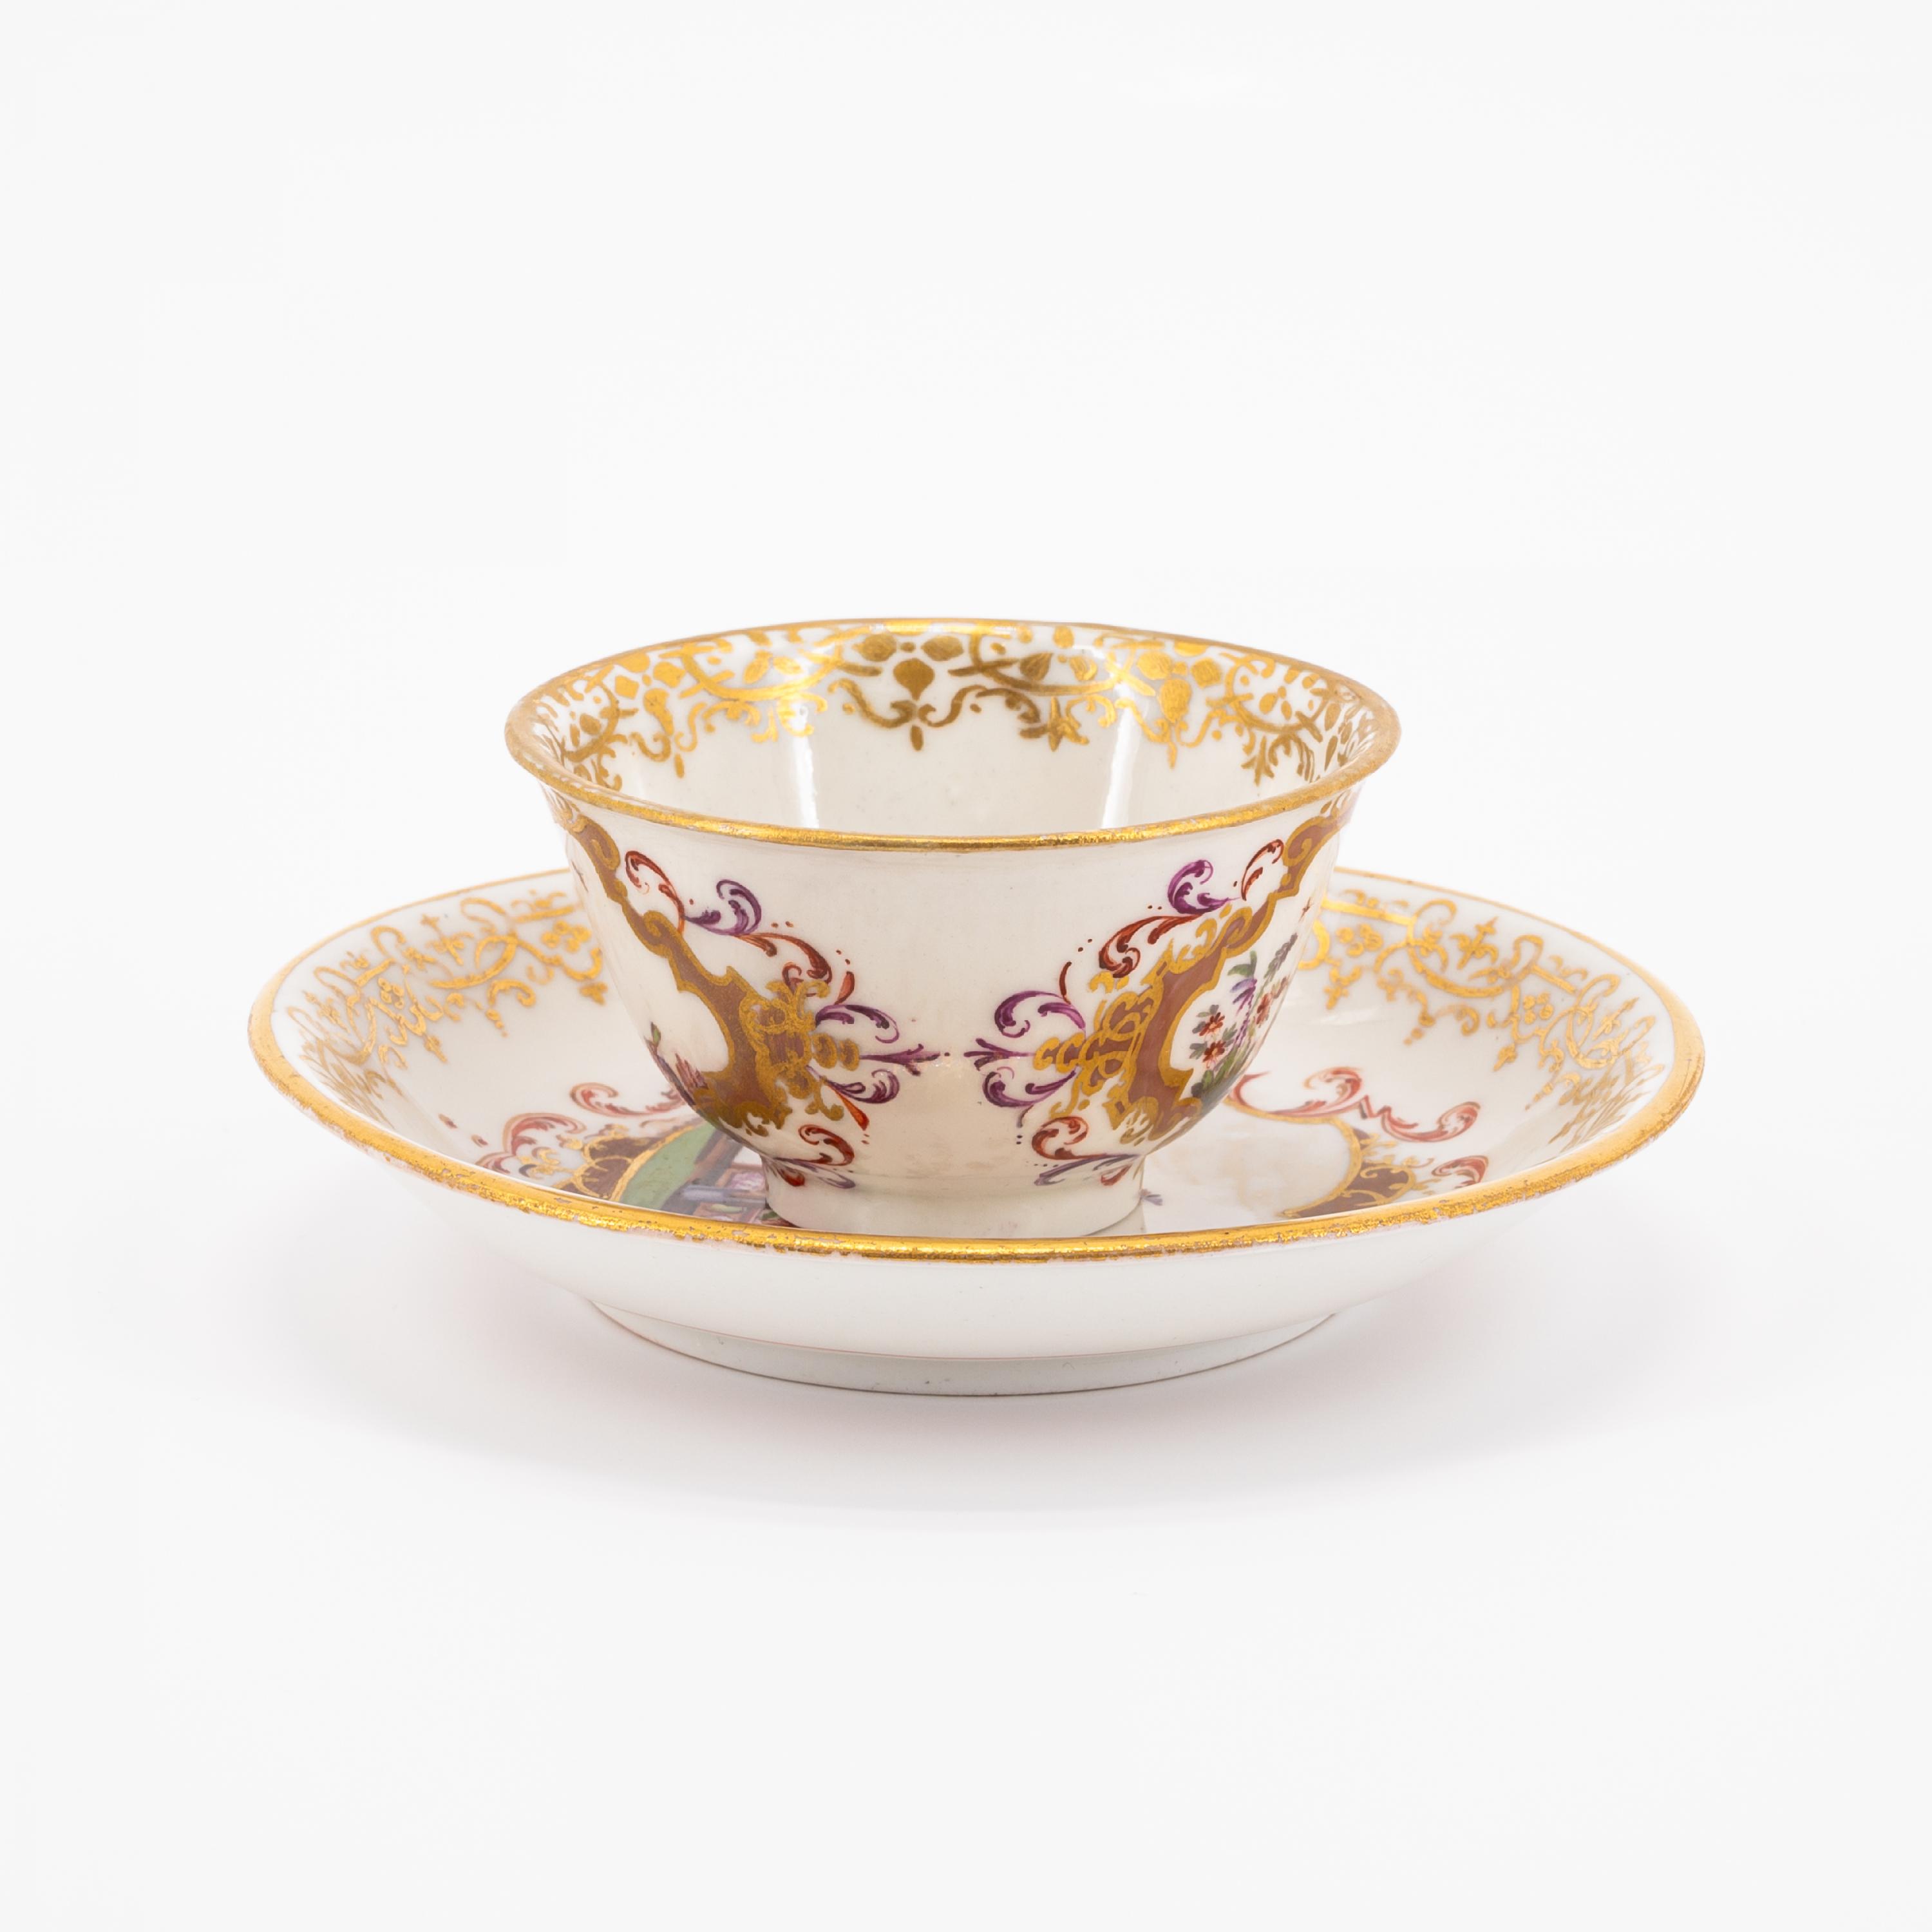 TWO PORCELAIN TEA BOWLS WITH SAUERES AND CHINOISERIES - Image 2 of 11